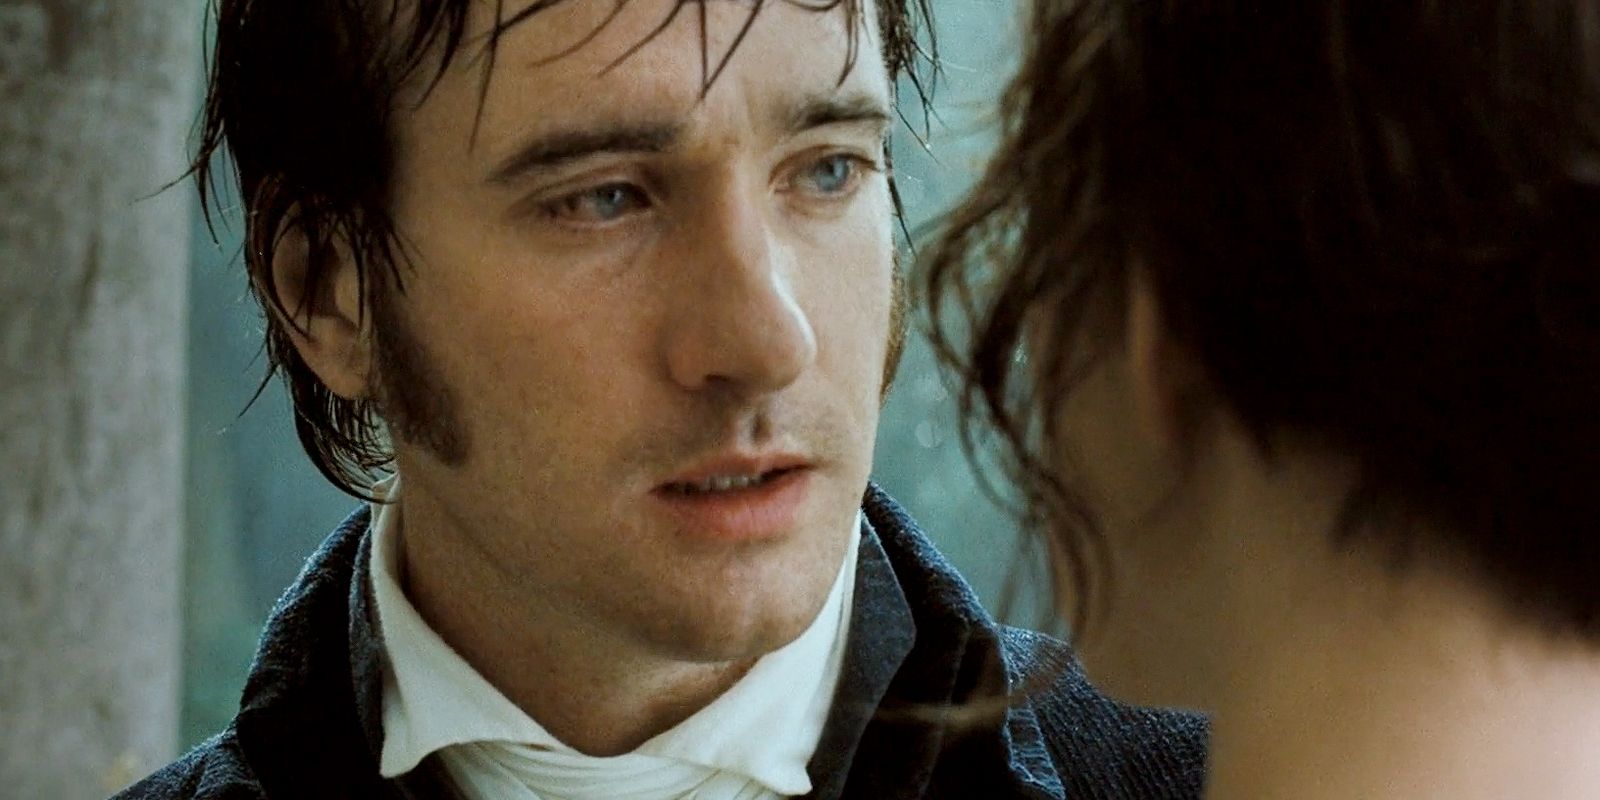 Mr. Darcy and Elizabeth look at each other in the rain scene in Pride & Prejudice, almost kissing.